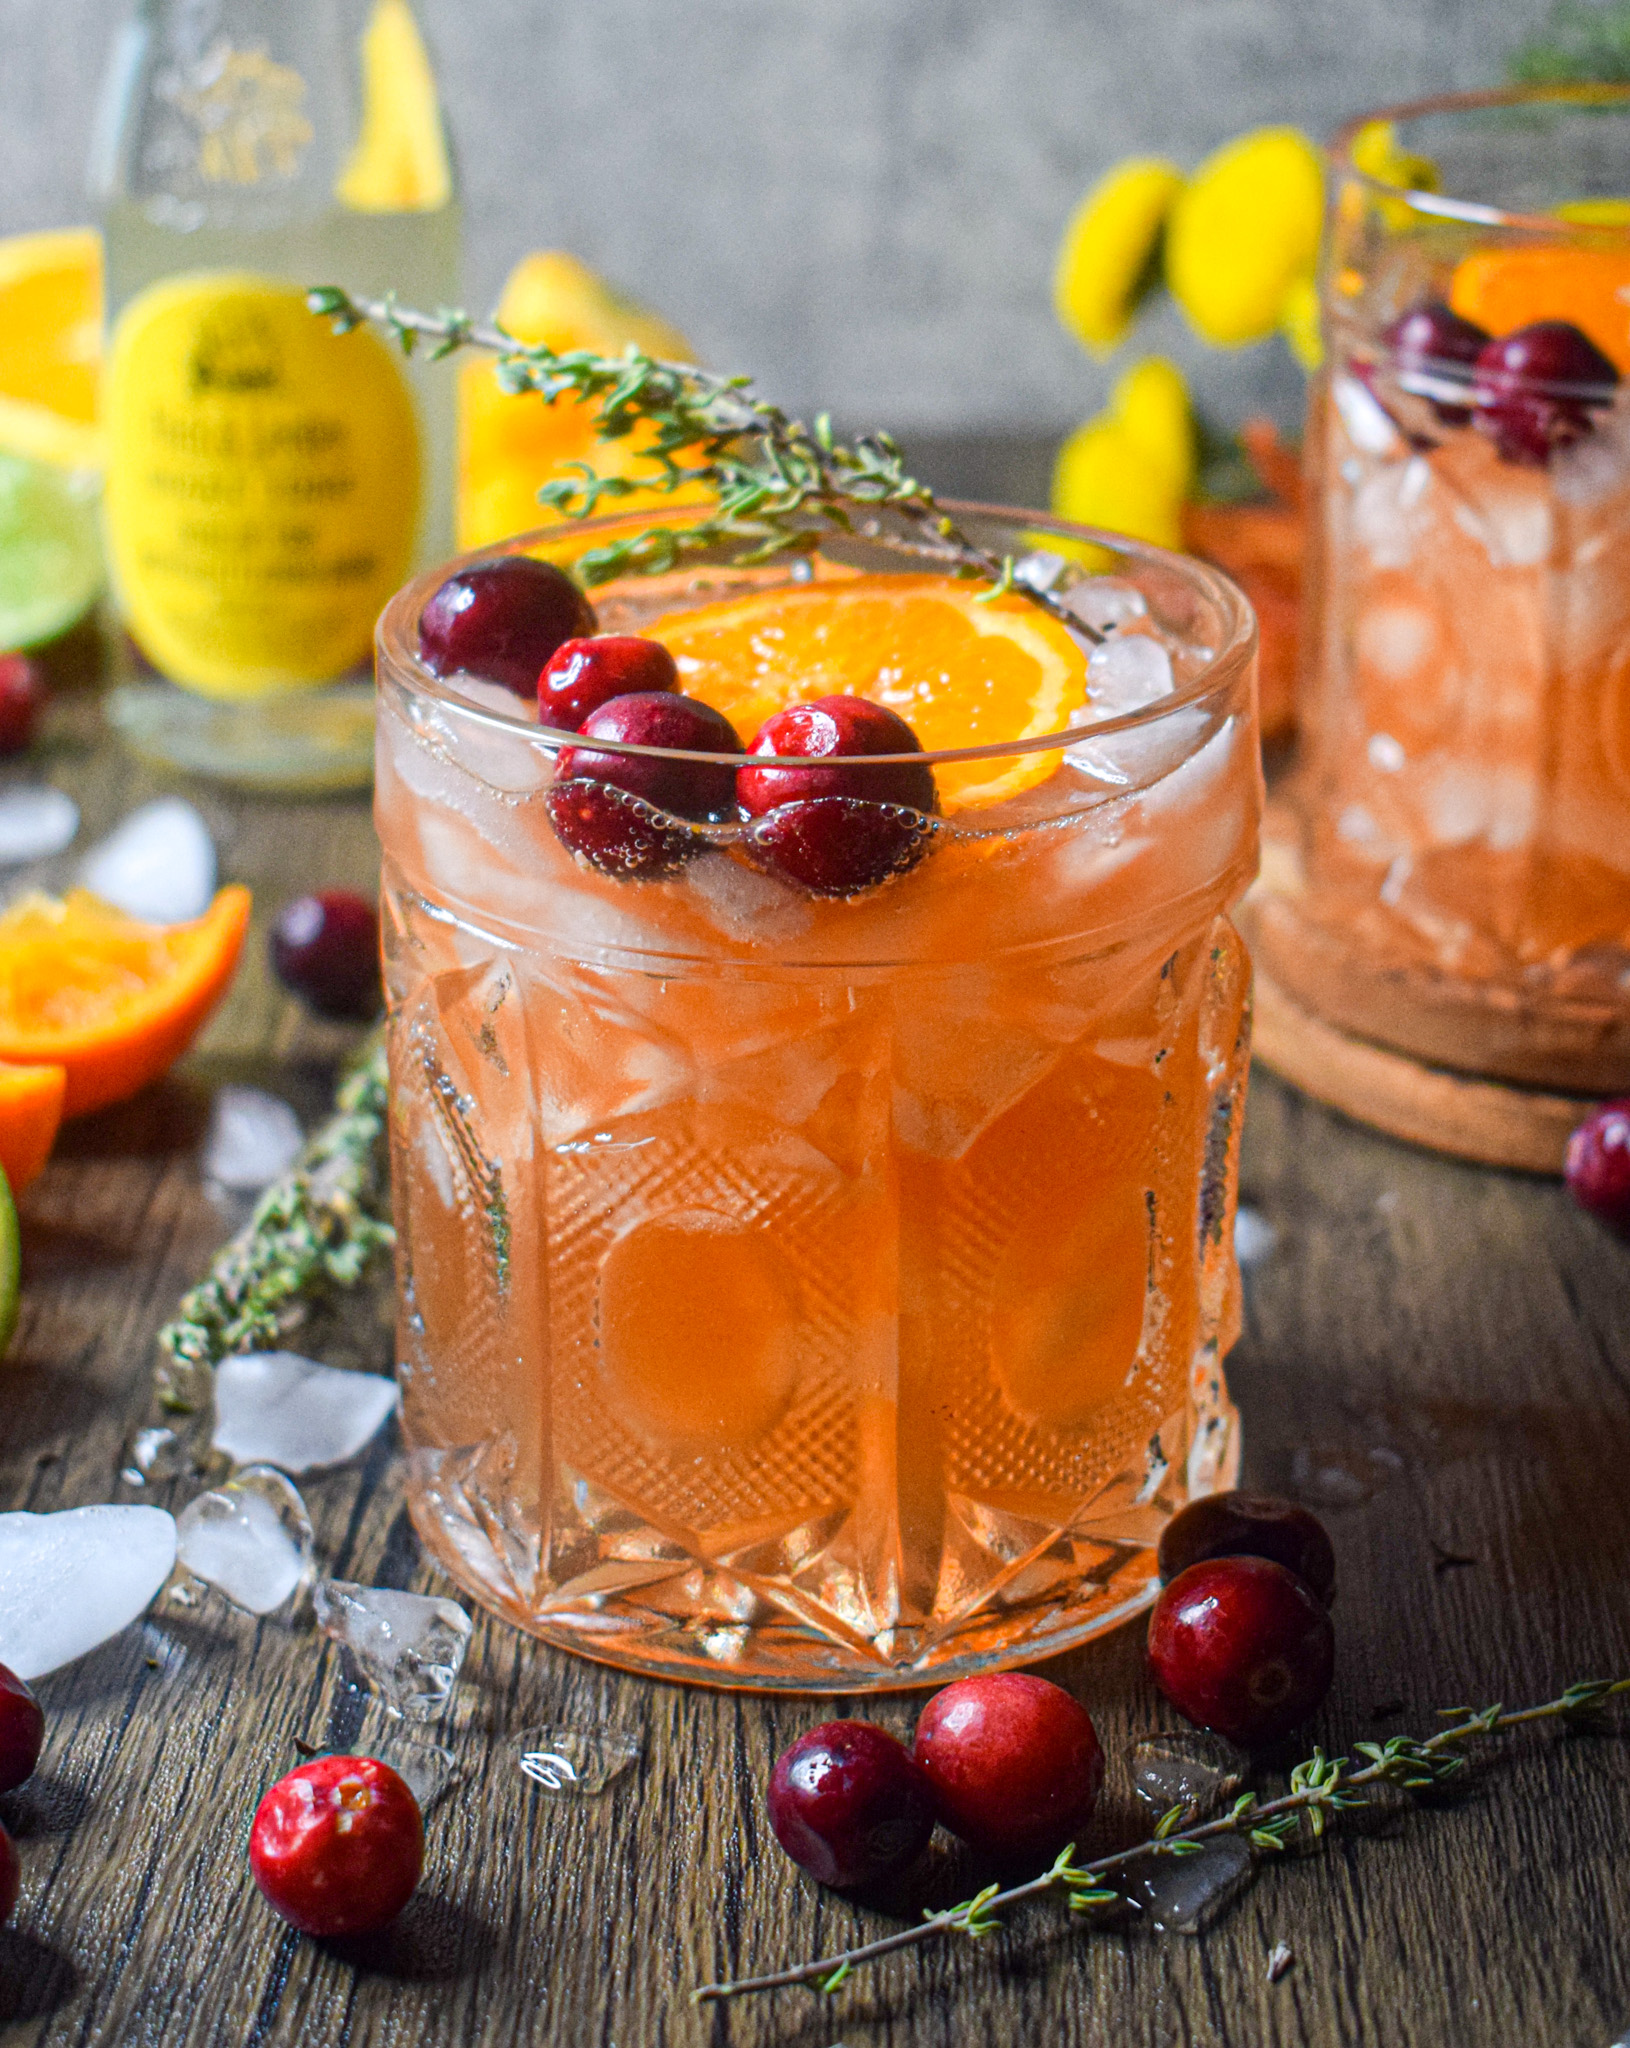 festive whiskey amaretto cranberry orange tonic cocktail recipe for christmas or thanksgiving 